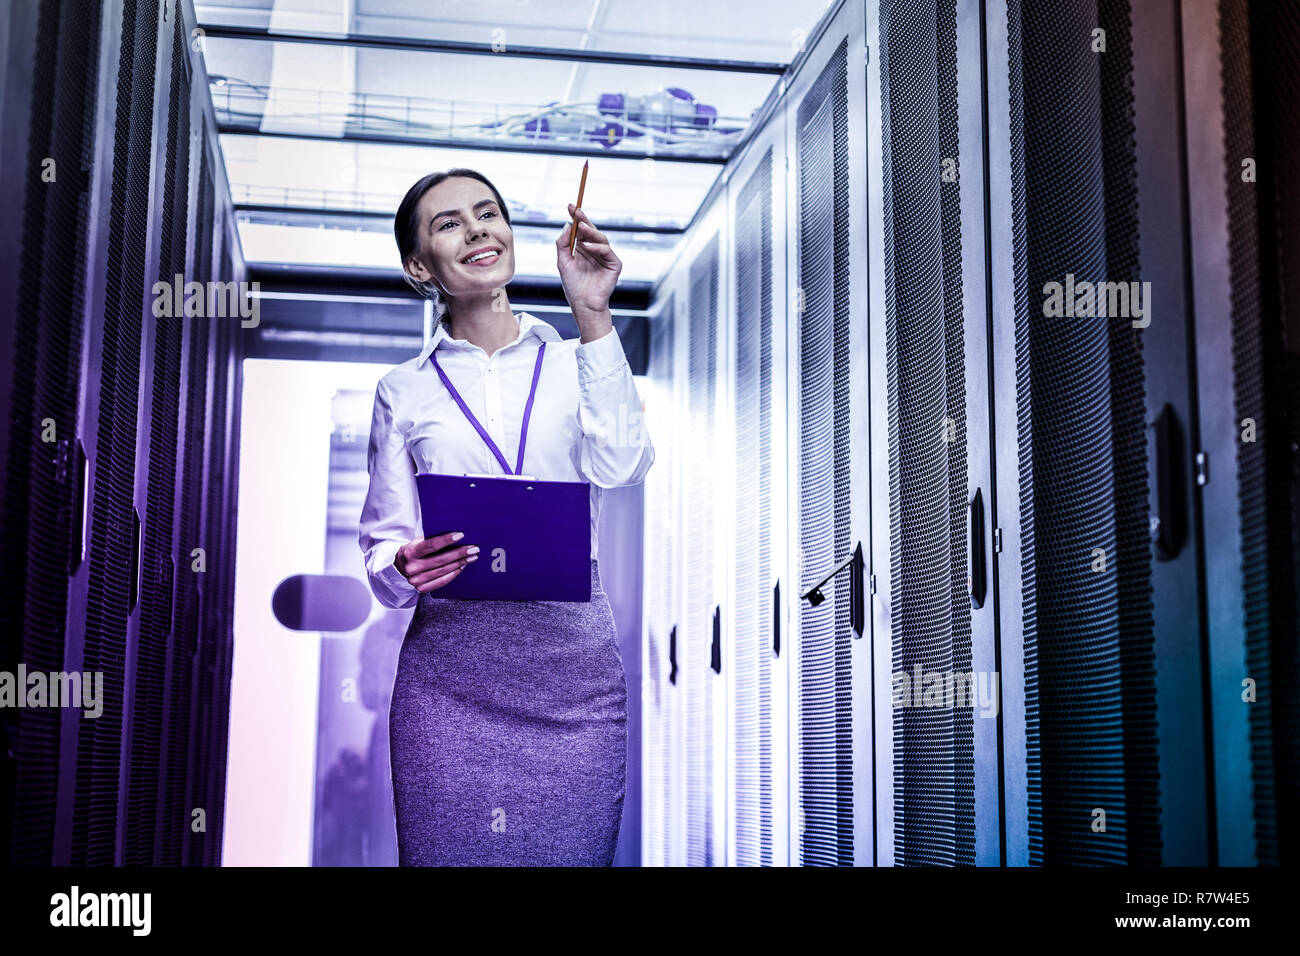 Positive smart young woman checking information systems Stock Photo